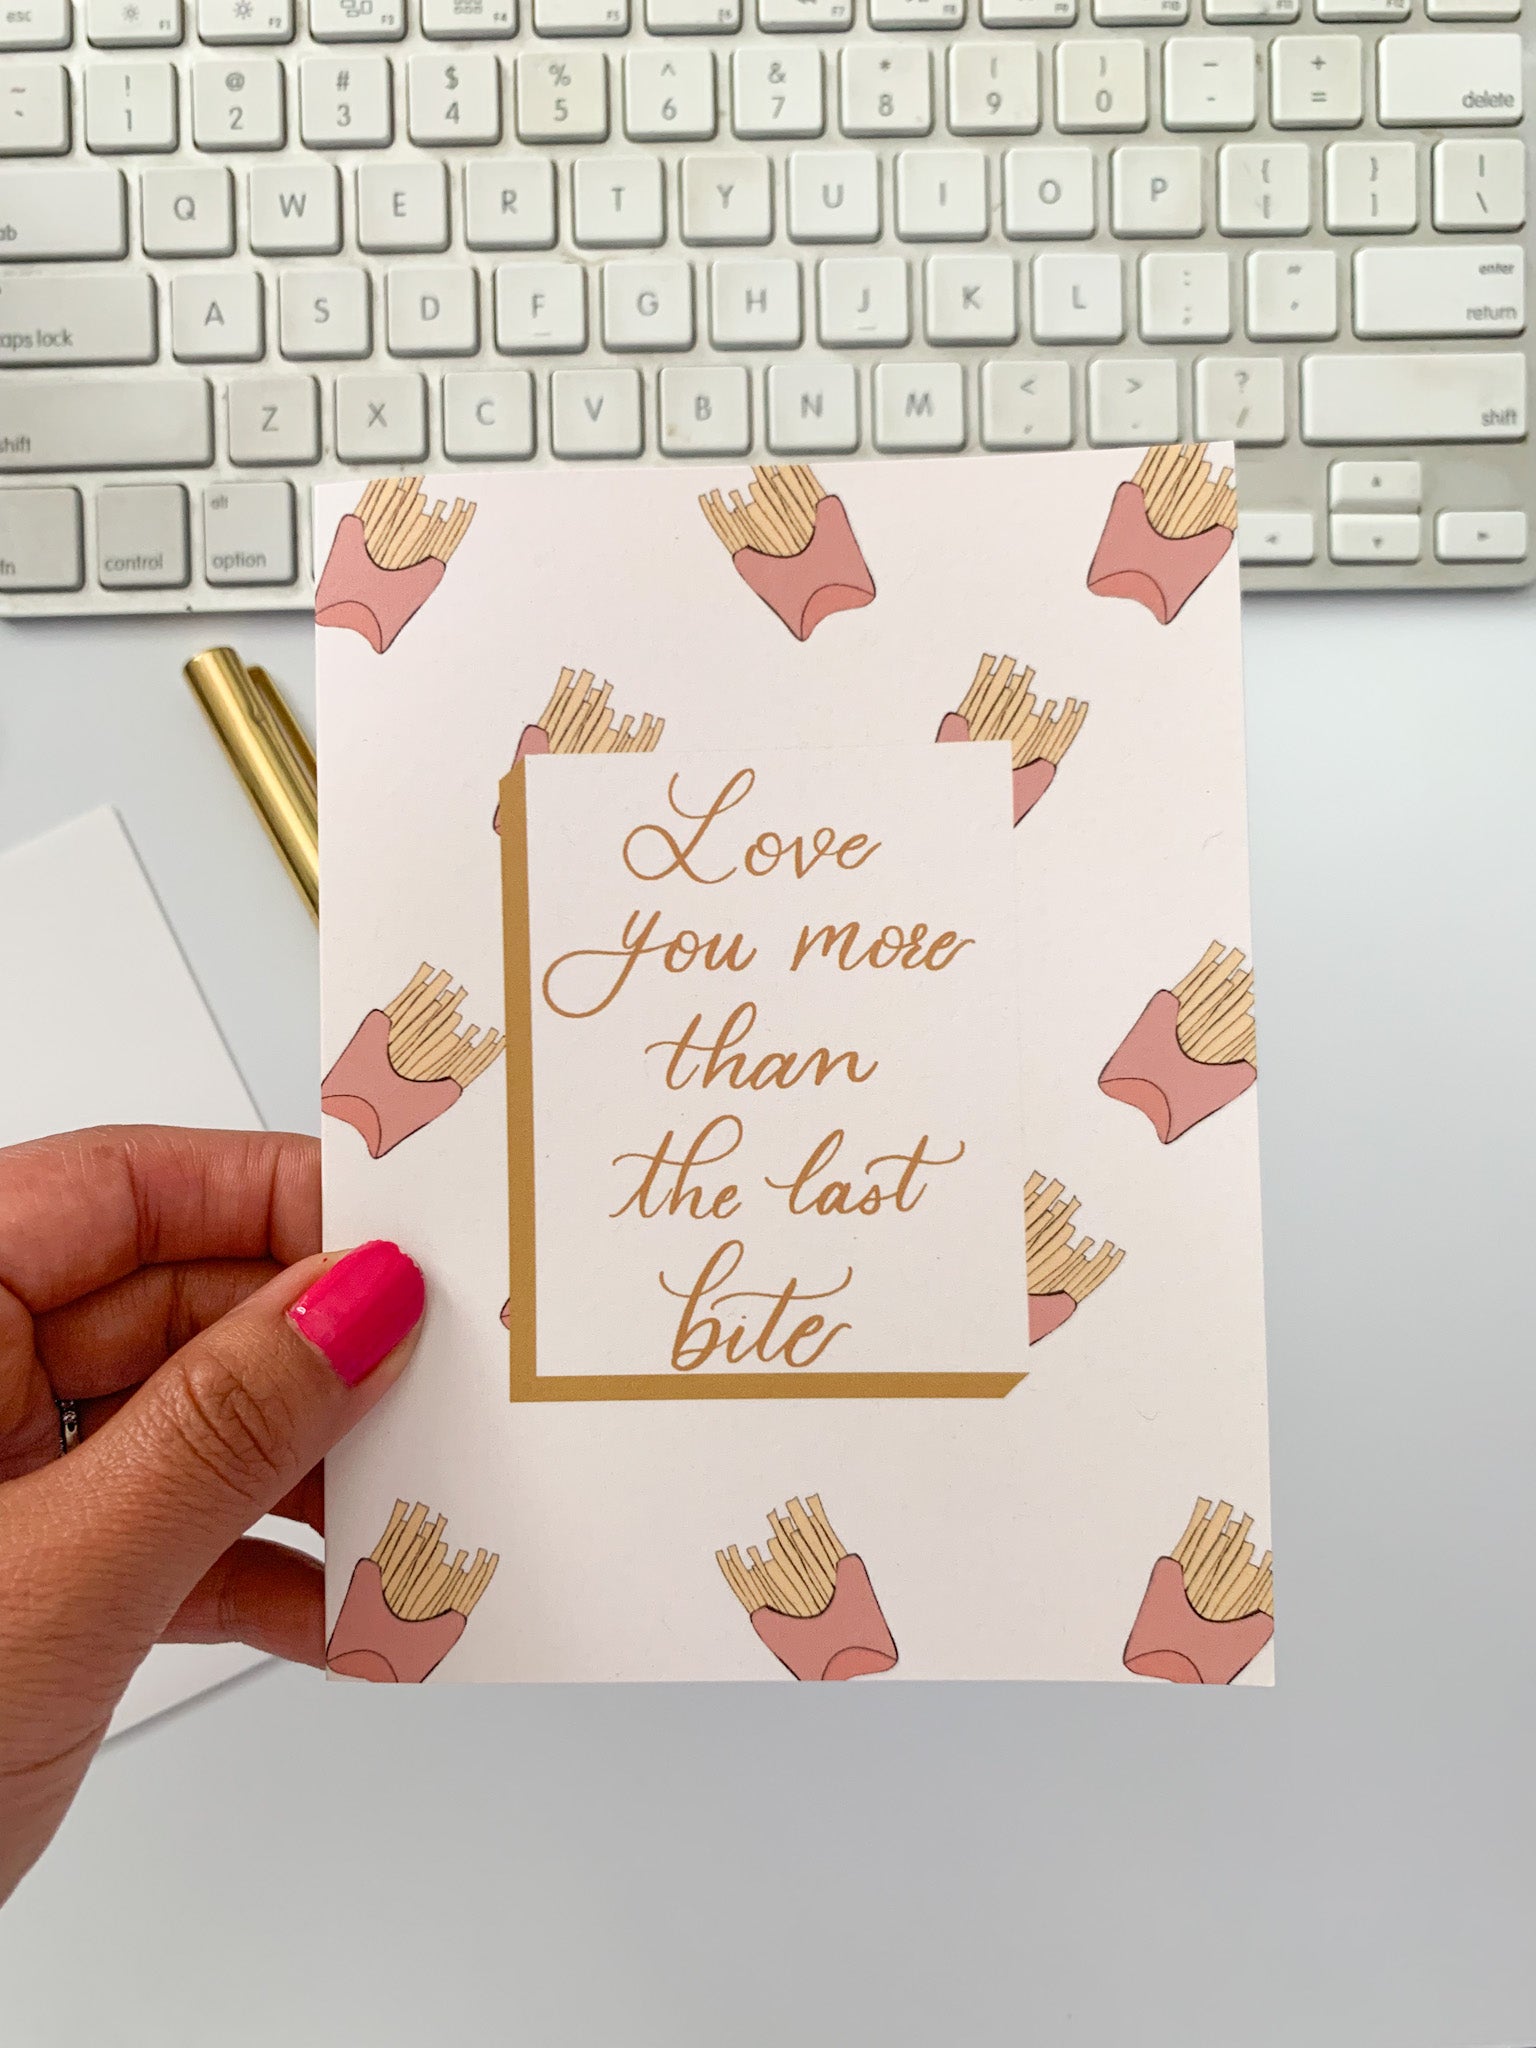 witty love card for partner